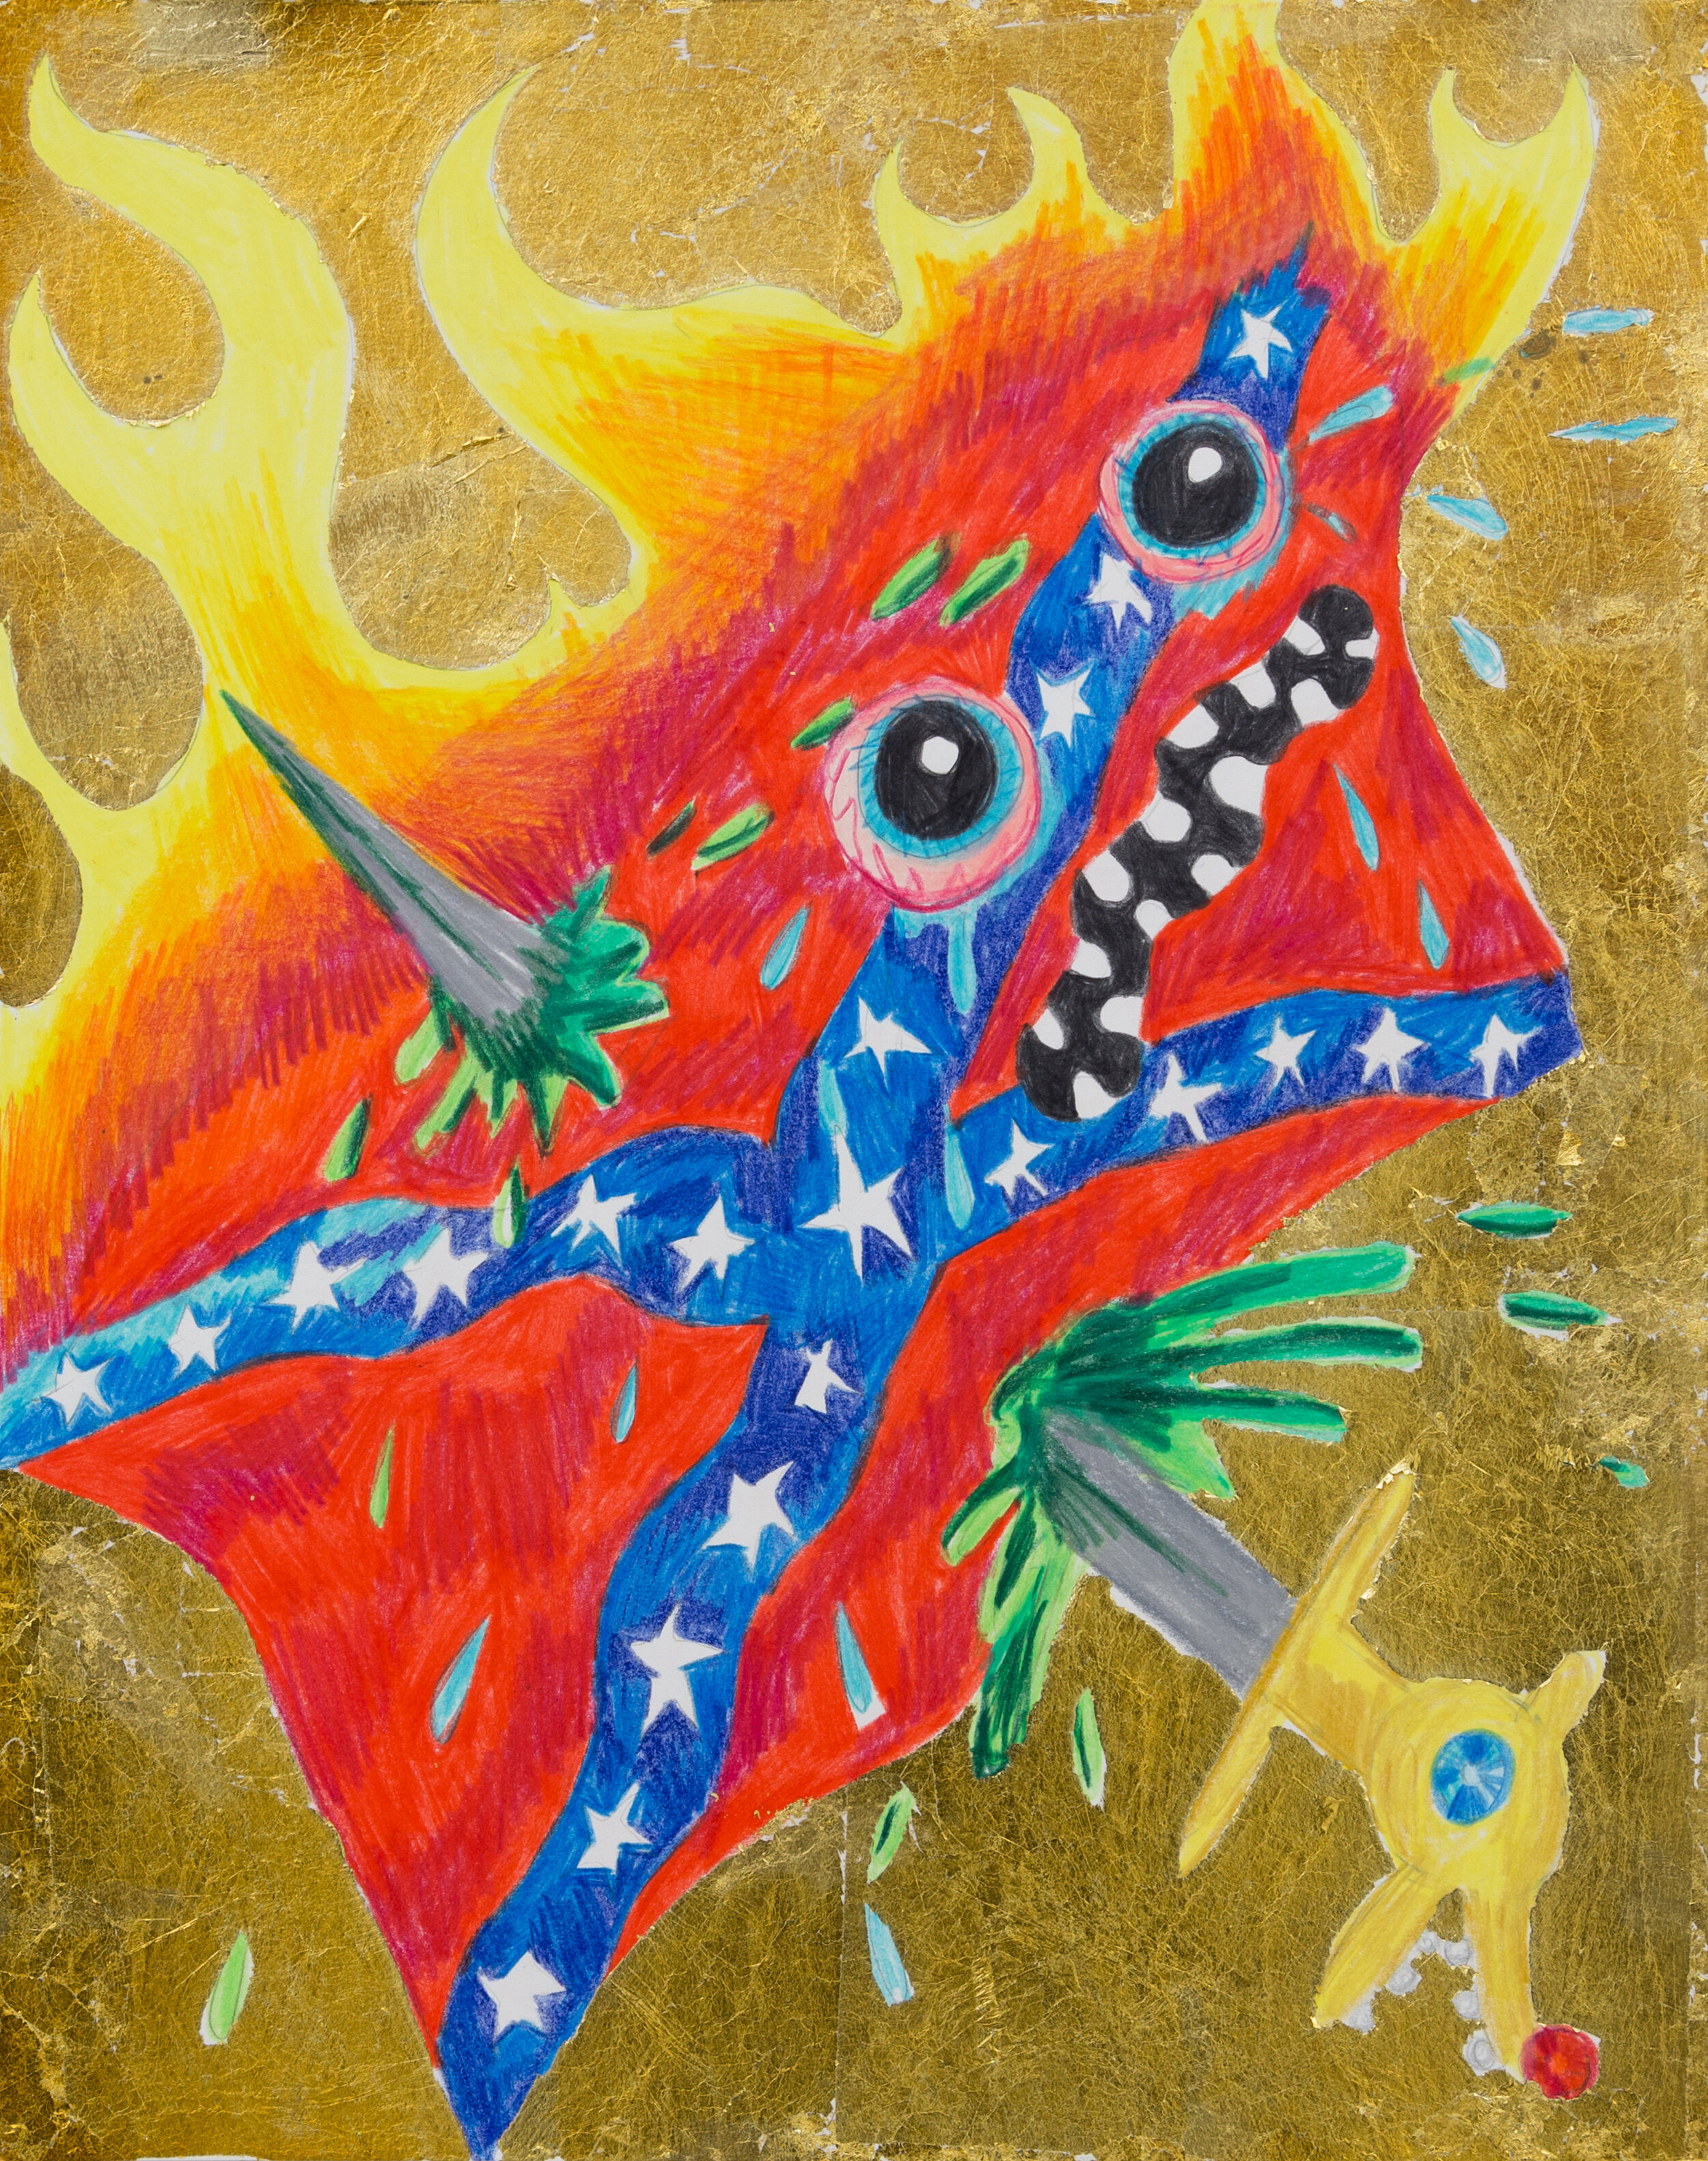   Stabbed, Crying, and on Fire Rebel Flag,  2017  14 x 11 Inches (35.56 x 27.94 cm.)  Colored Pencil and Gold Leaf on Paper 